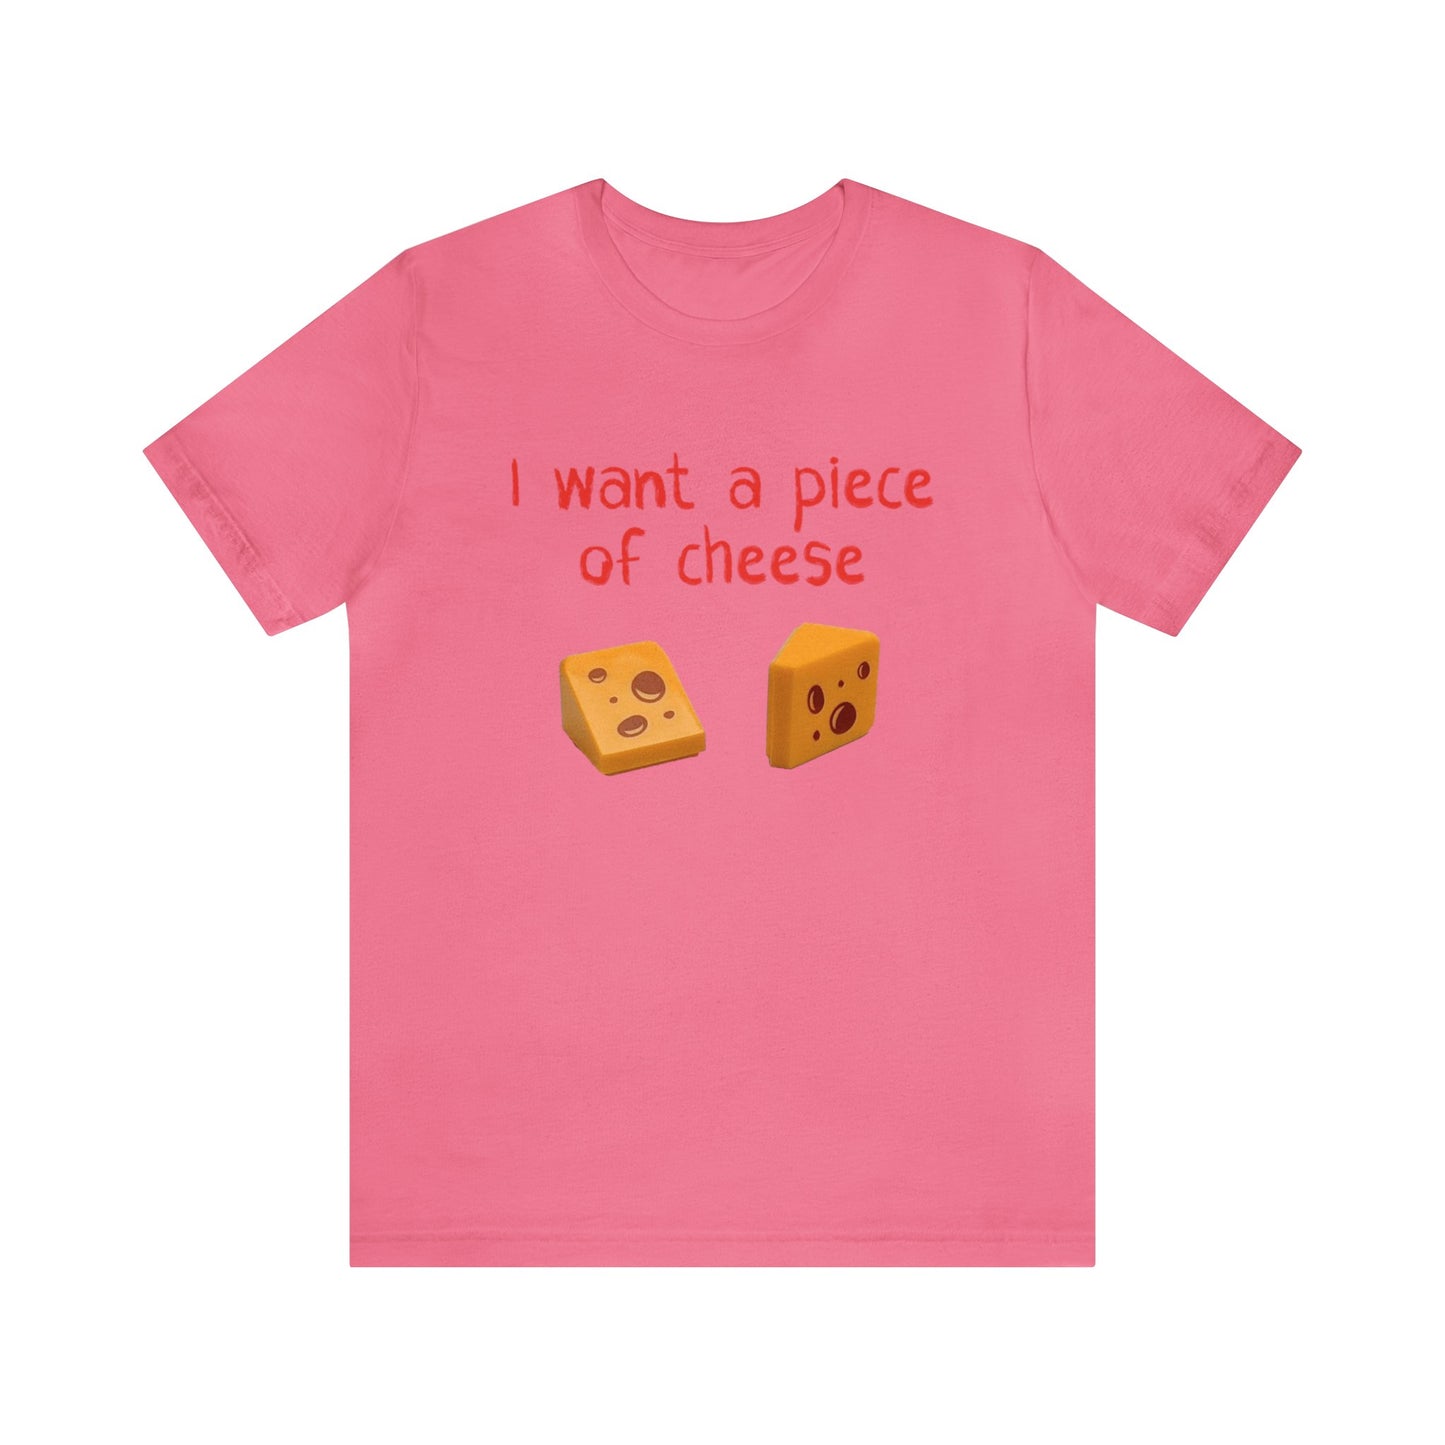 I want a piece of cheese T-Shirt